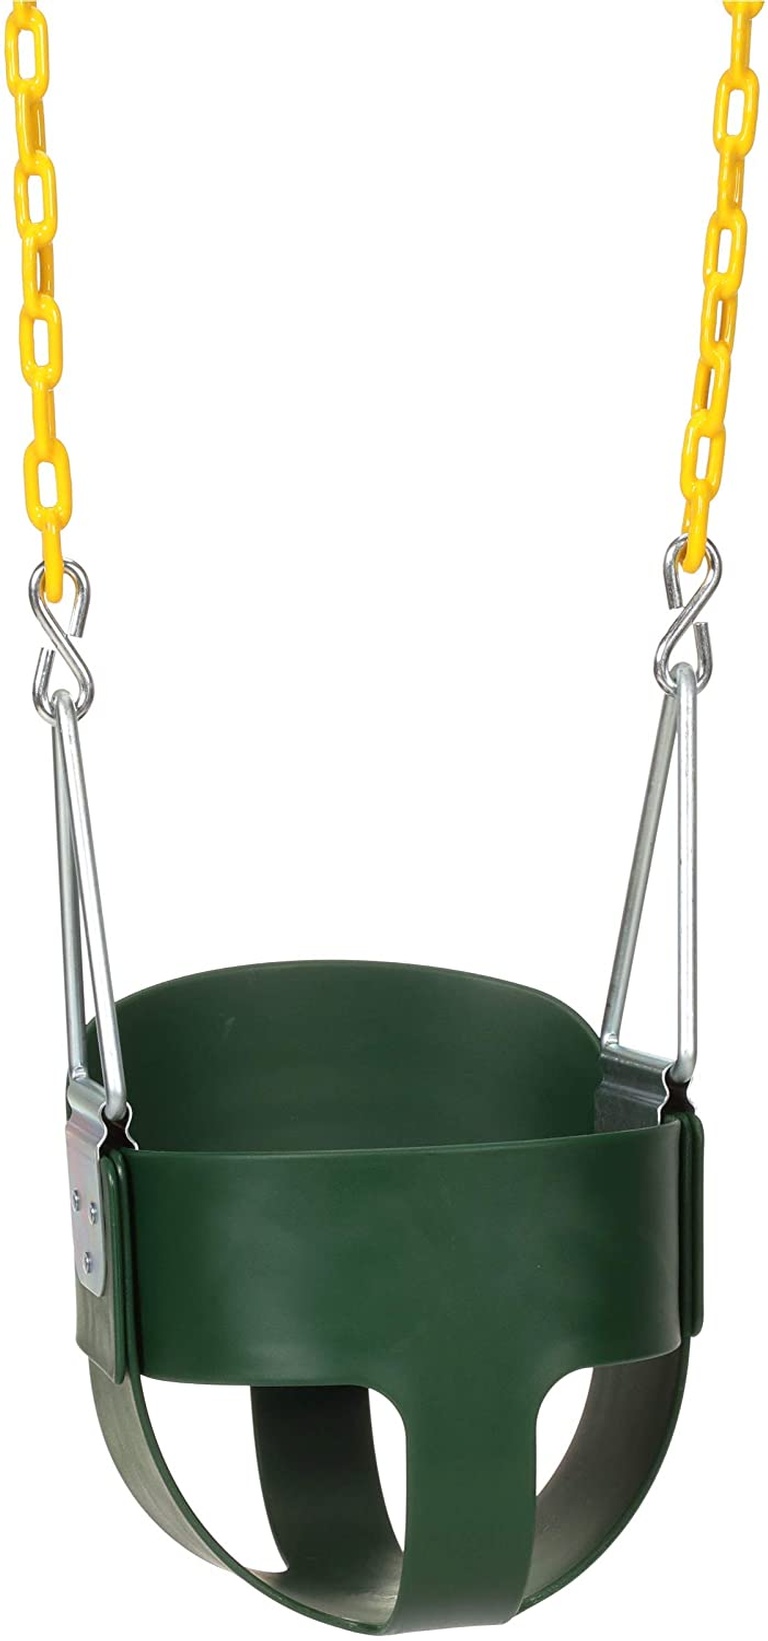 Eastern Jungle Gym Heavy-Duty High Back Full Bucket Toddler Swing Seat with Coated Swing Chains Fully Assembled